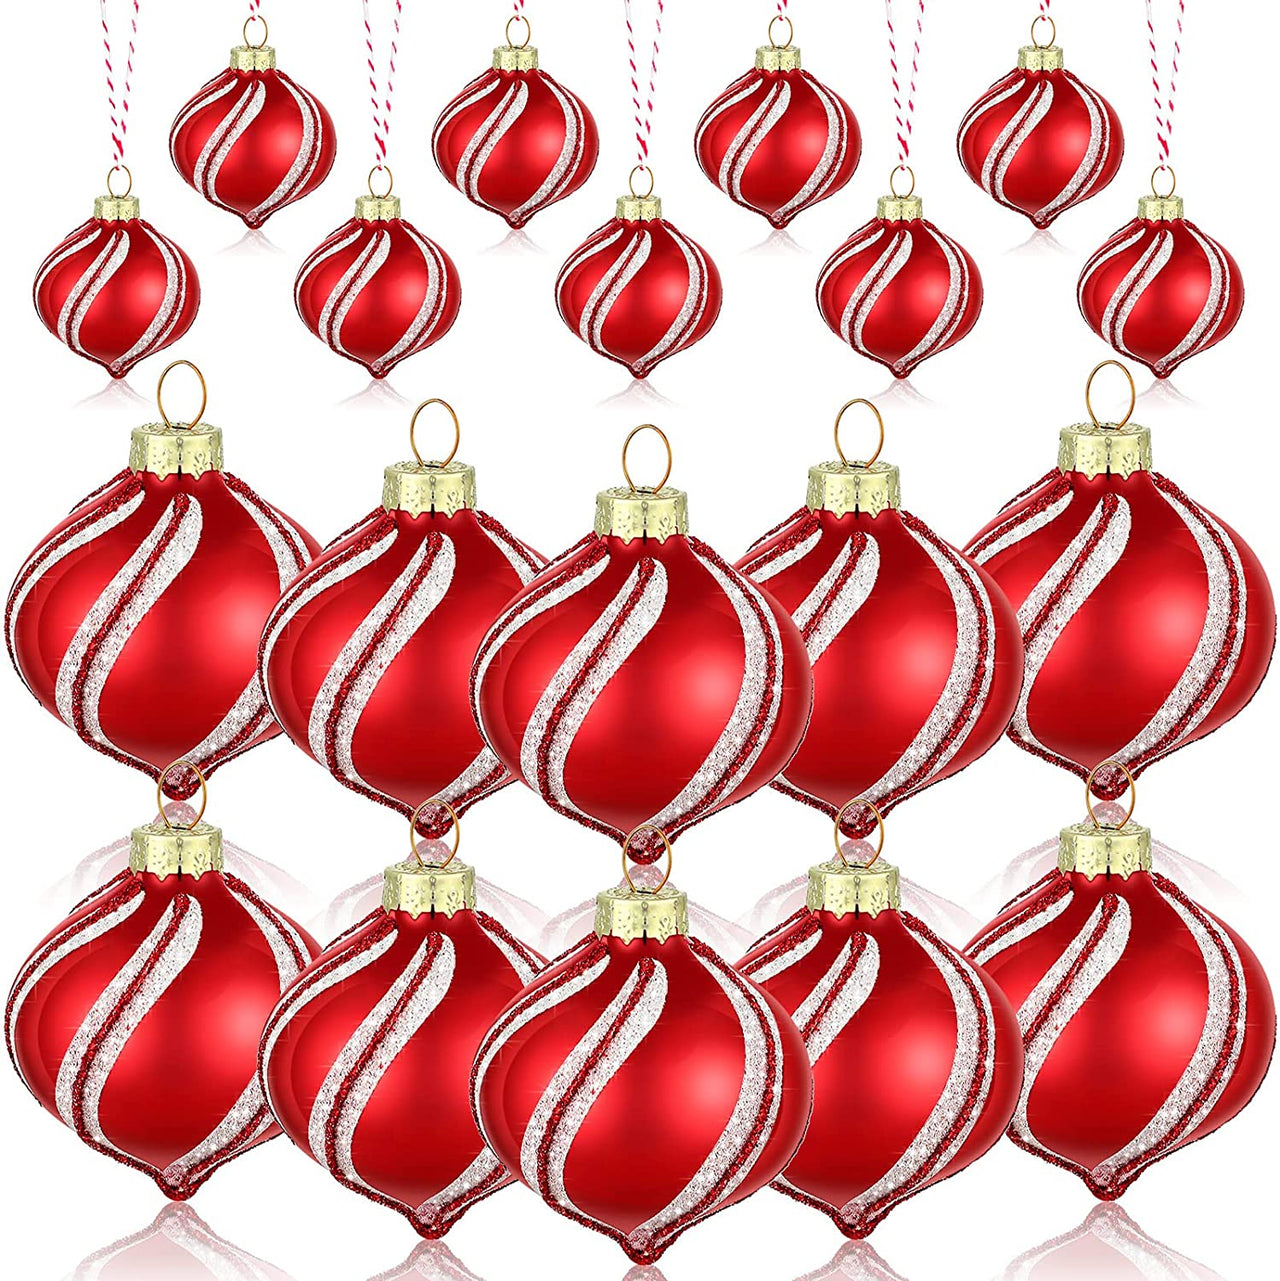 12 Pcs Peppermint Candy Ornament Set Christmas Candy Cane Balls Ornaments Christmas Candy Cane Decorations White Red Christmas Balls Mini Glass Ornaments for Indoor Outdoor Tree Decor